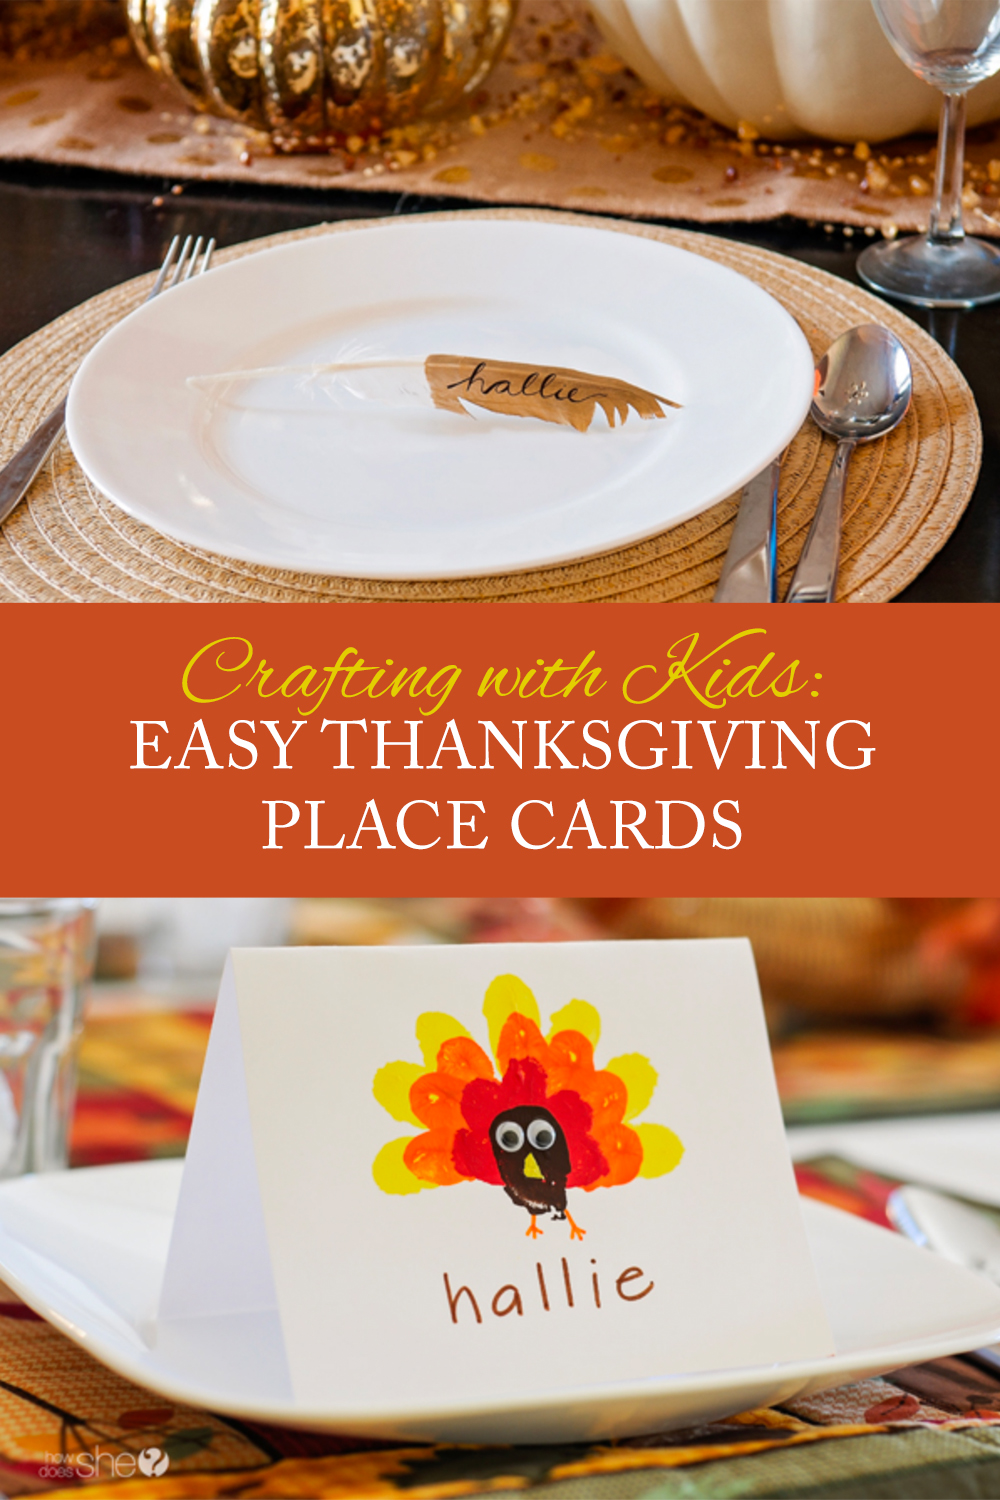 Crafting with Children: Straightforward Thanksgiving Place Playing cards | Digital Noch